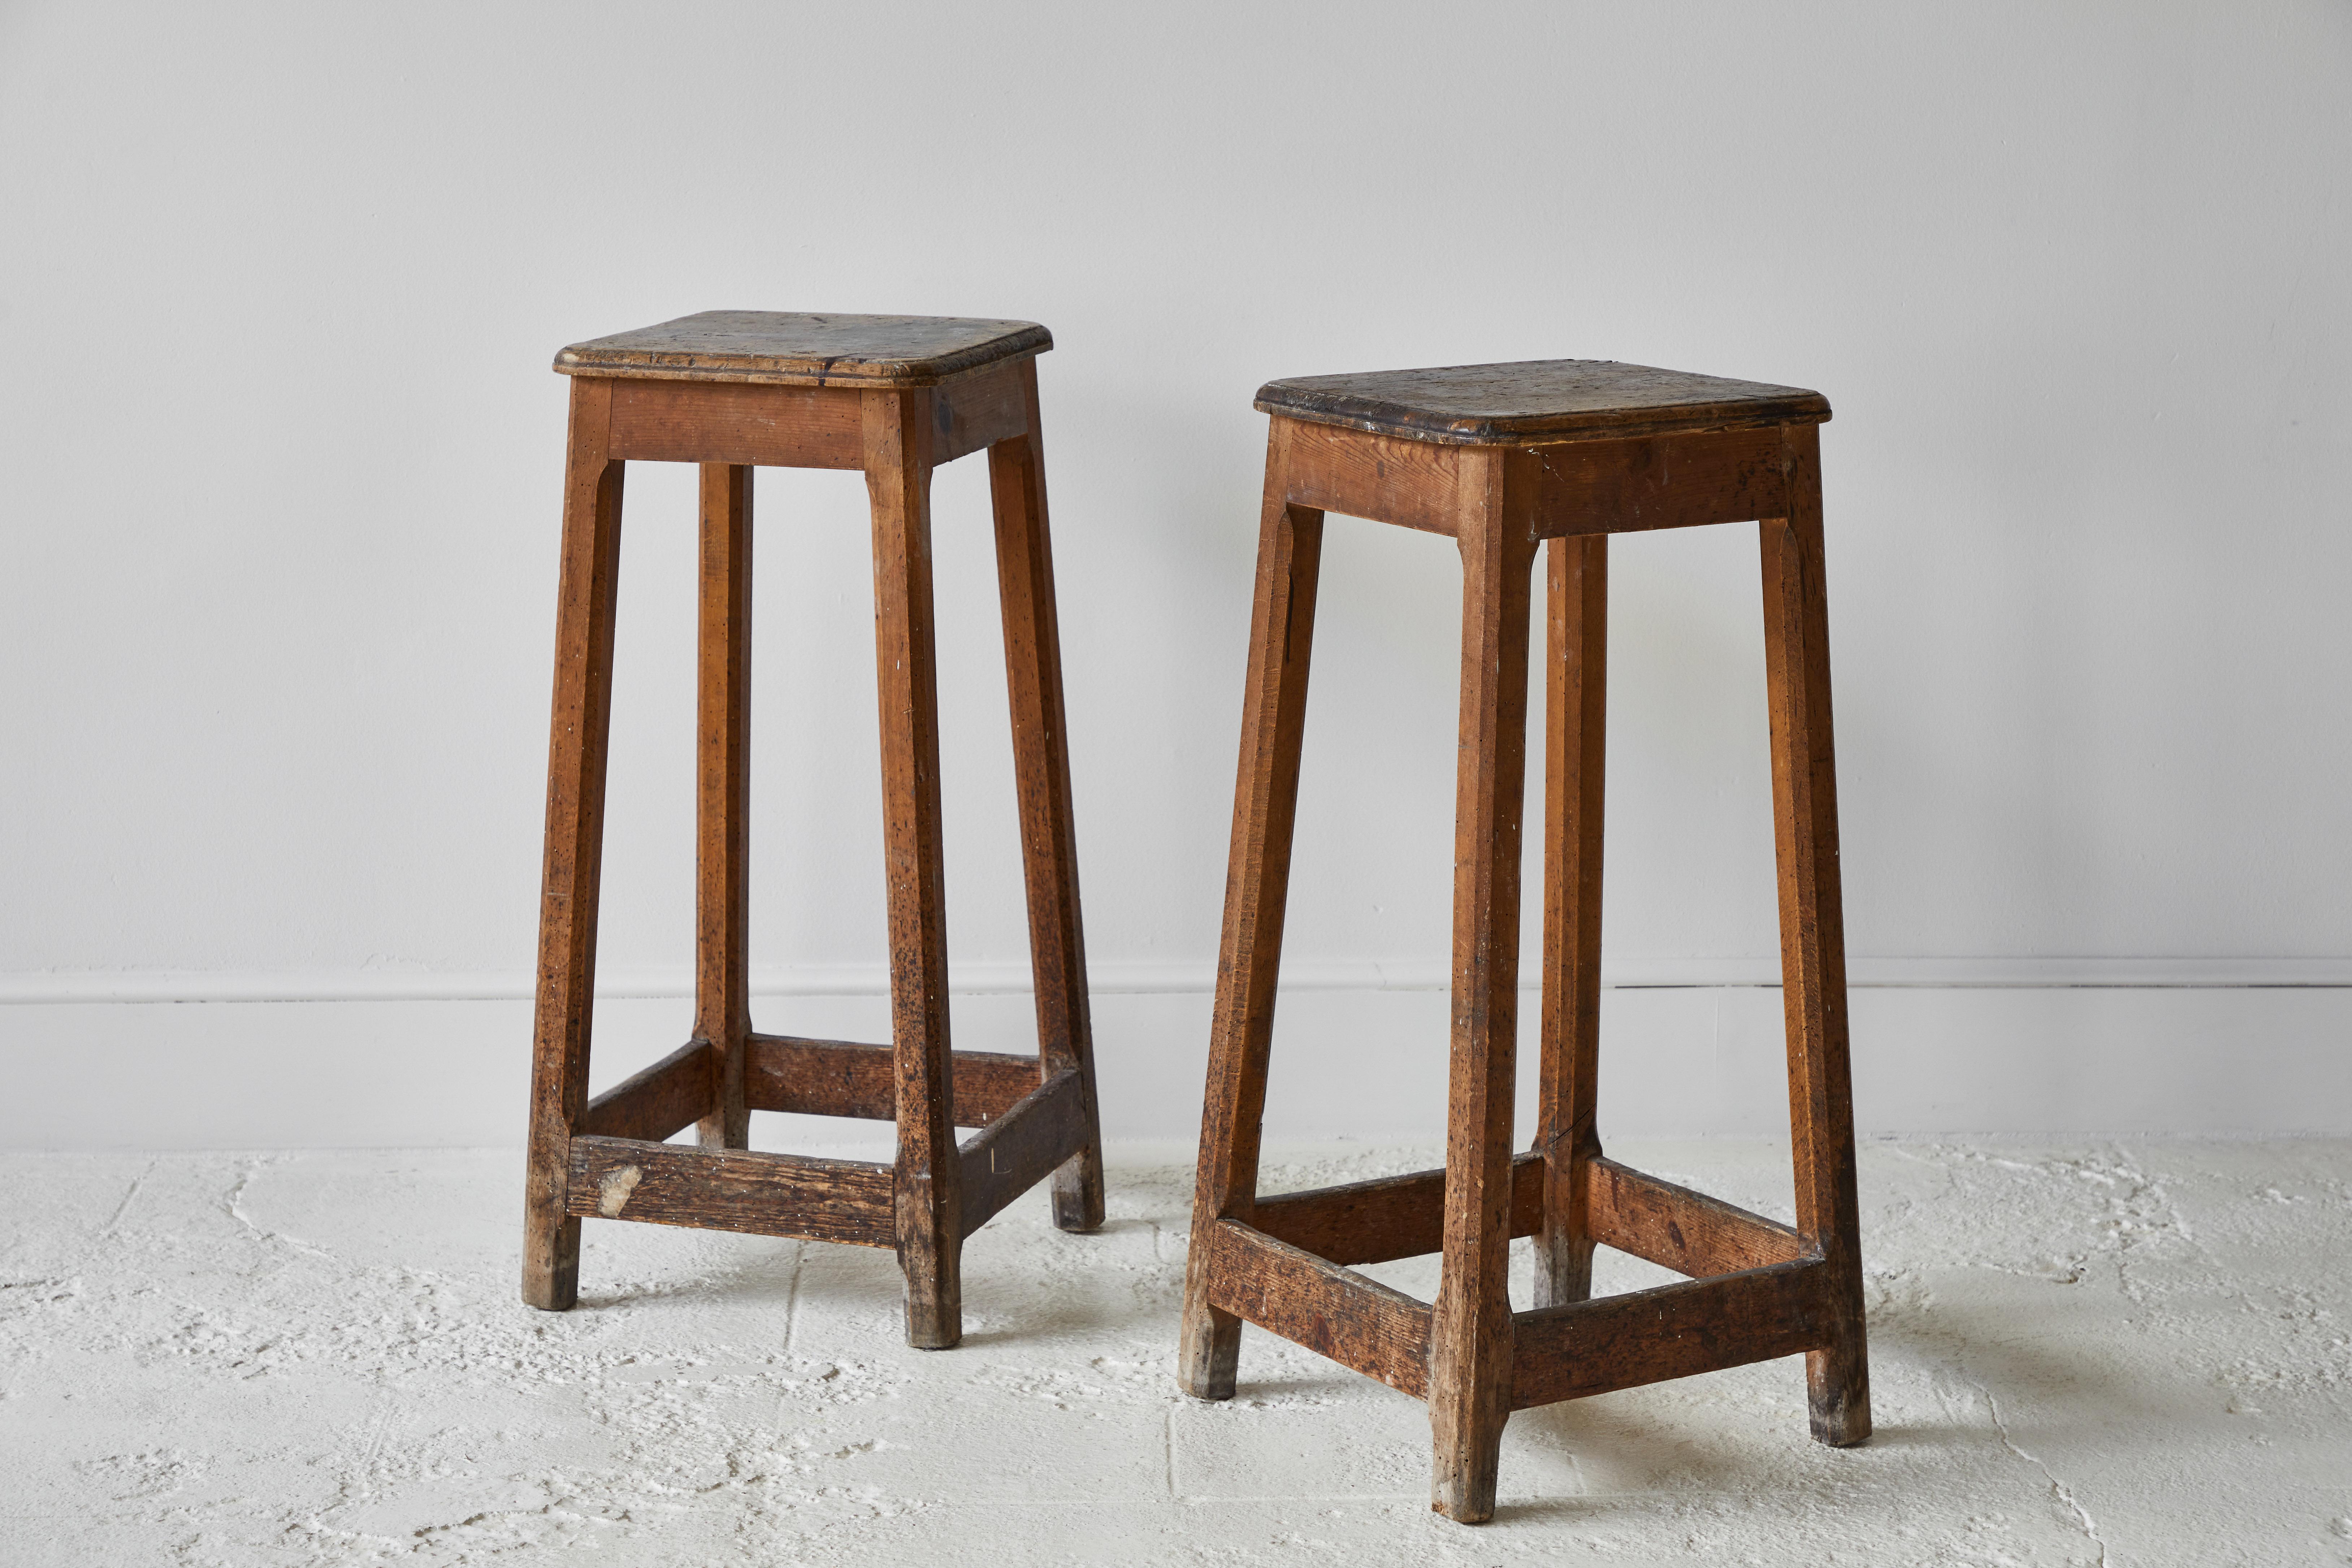 Rustic Stools with paint markings, the stools can also be great pedestals. Two available, sold individually.